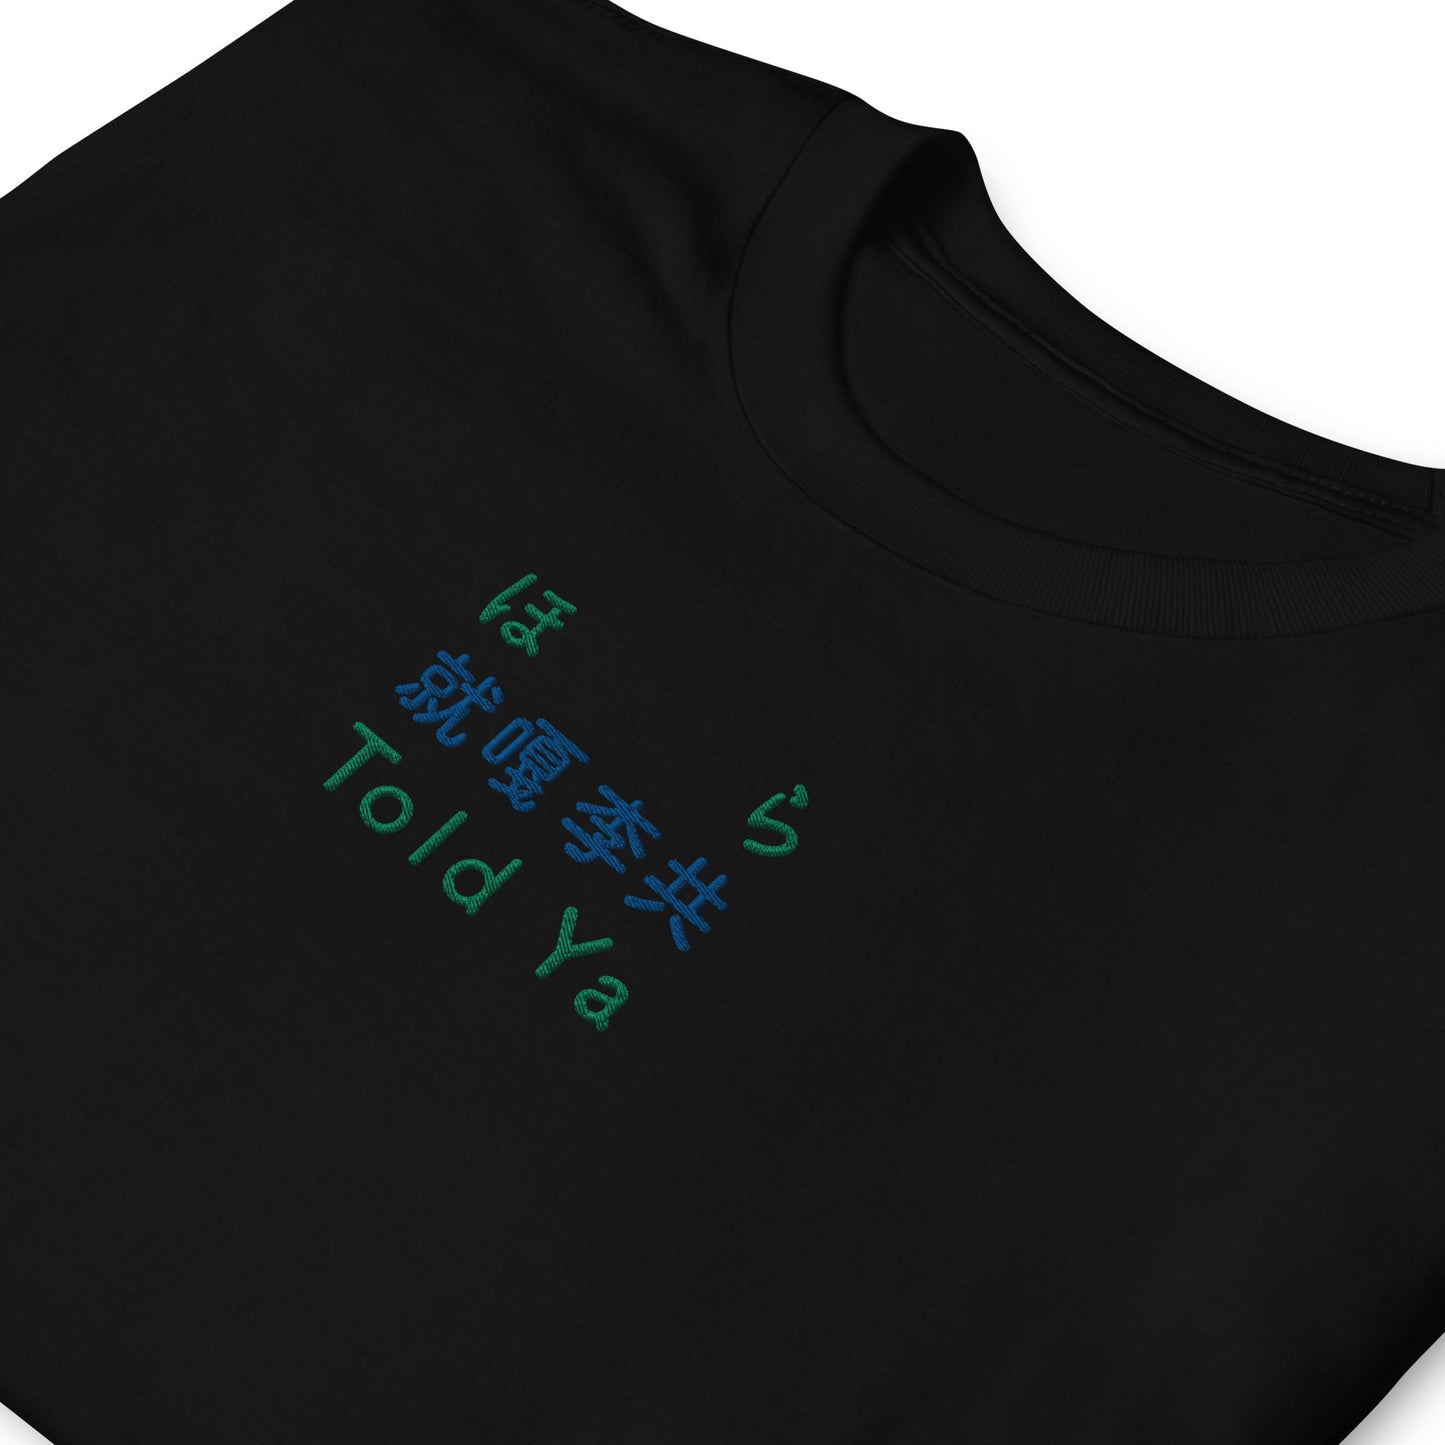 Black High Quality Tee - Front Design with an Blue,Green Embroidery "Told Ya" in Japanese,Chinese and English